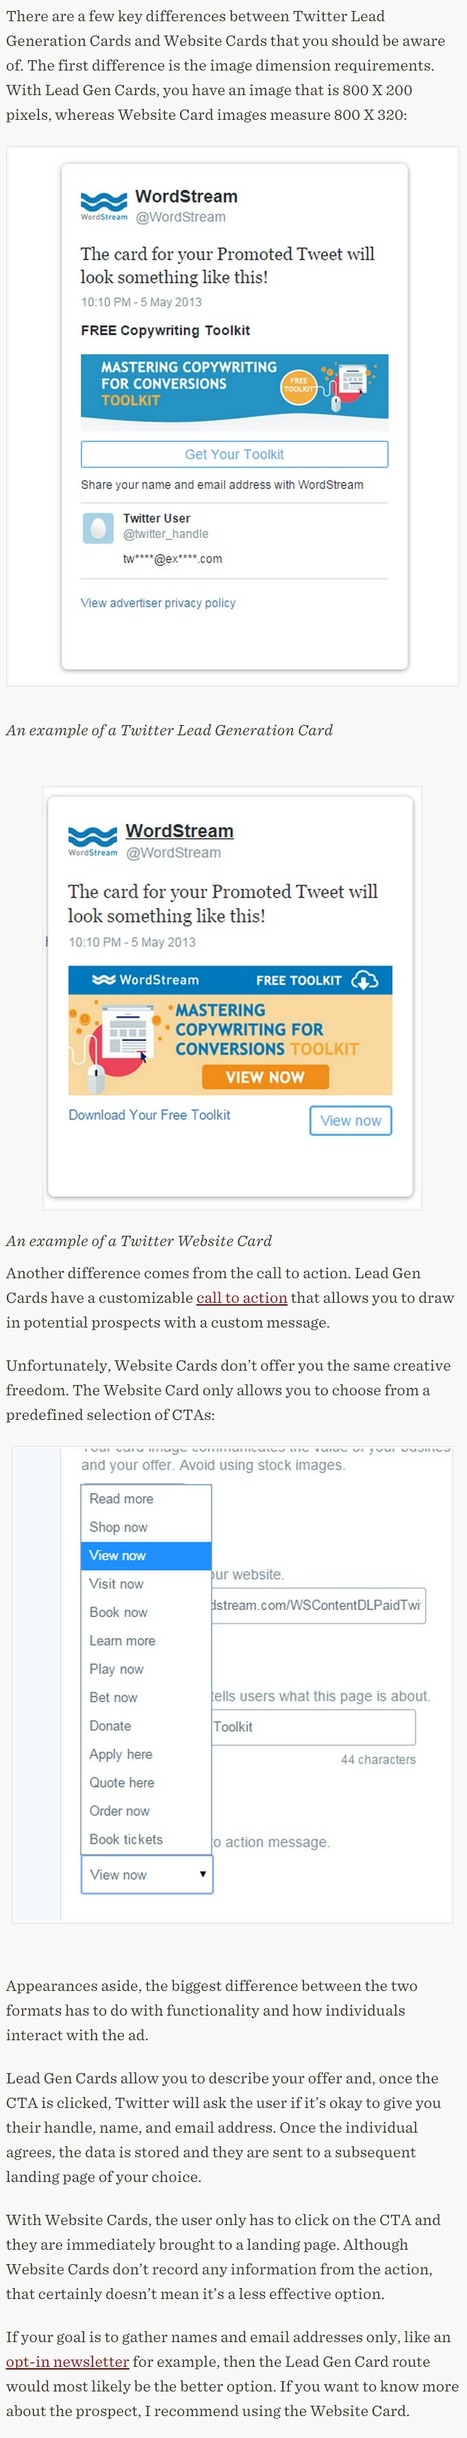 A Step-by-Step Guide to Using Twitter Ads for Lead Gen | Wordstream | The MarTech Digest | Scoop.it